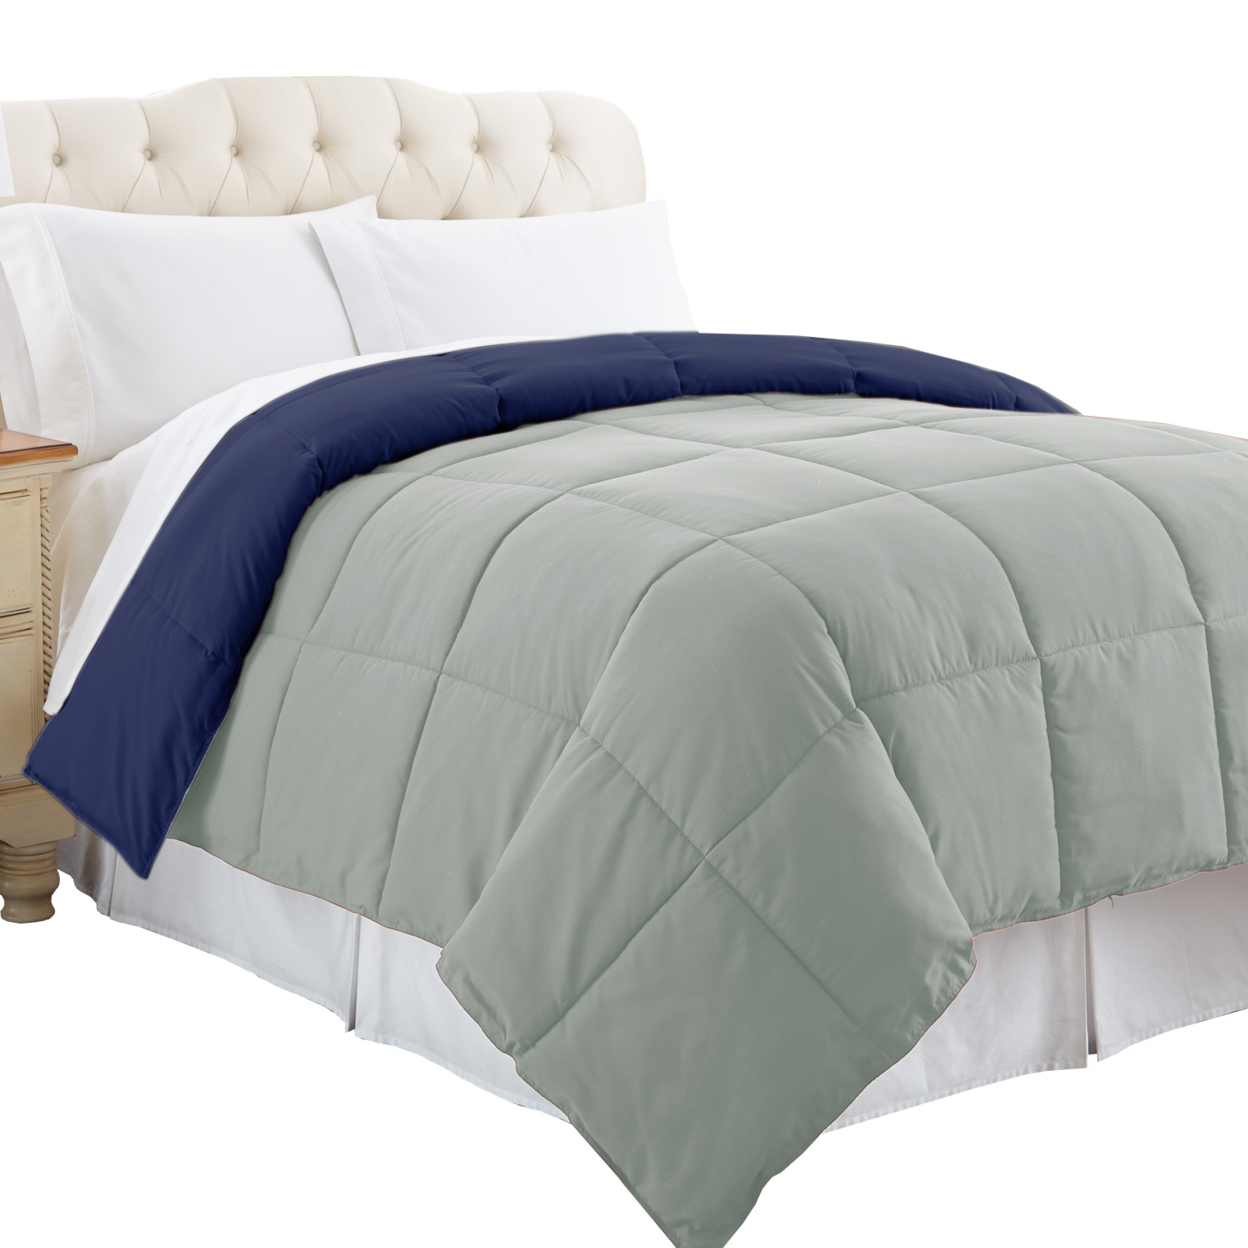 Genoa Reversible Queen Comforter With Box Quilting The Urban Port, Silver And Blue- Saltoro Sherpi